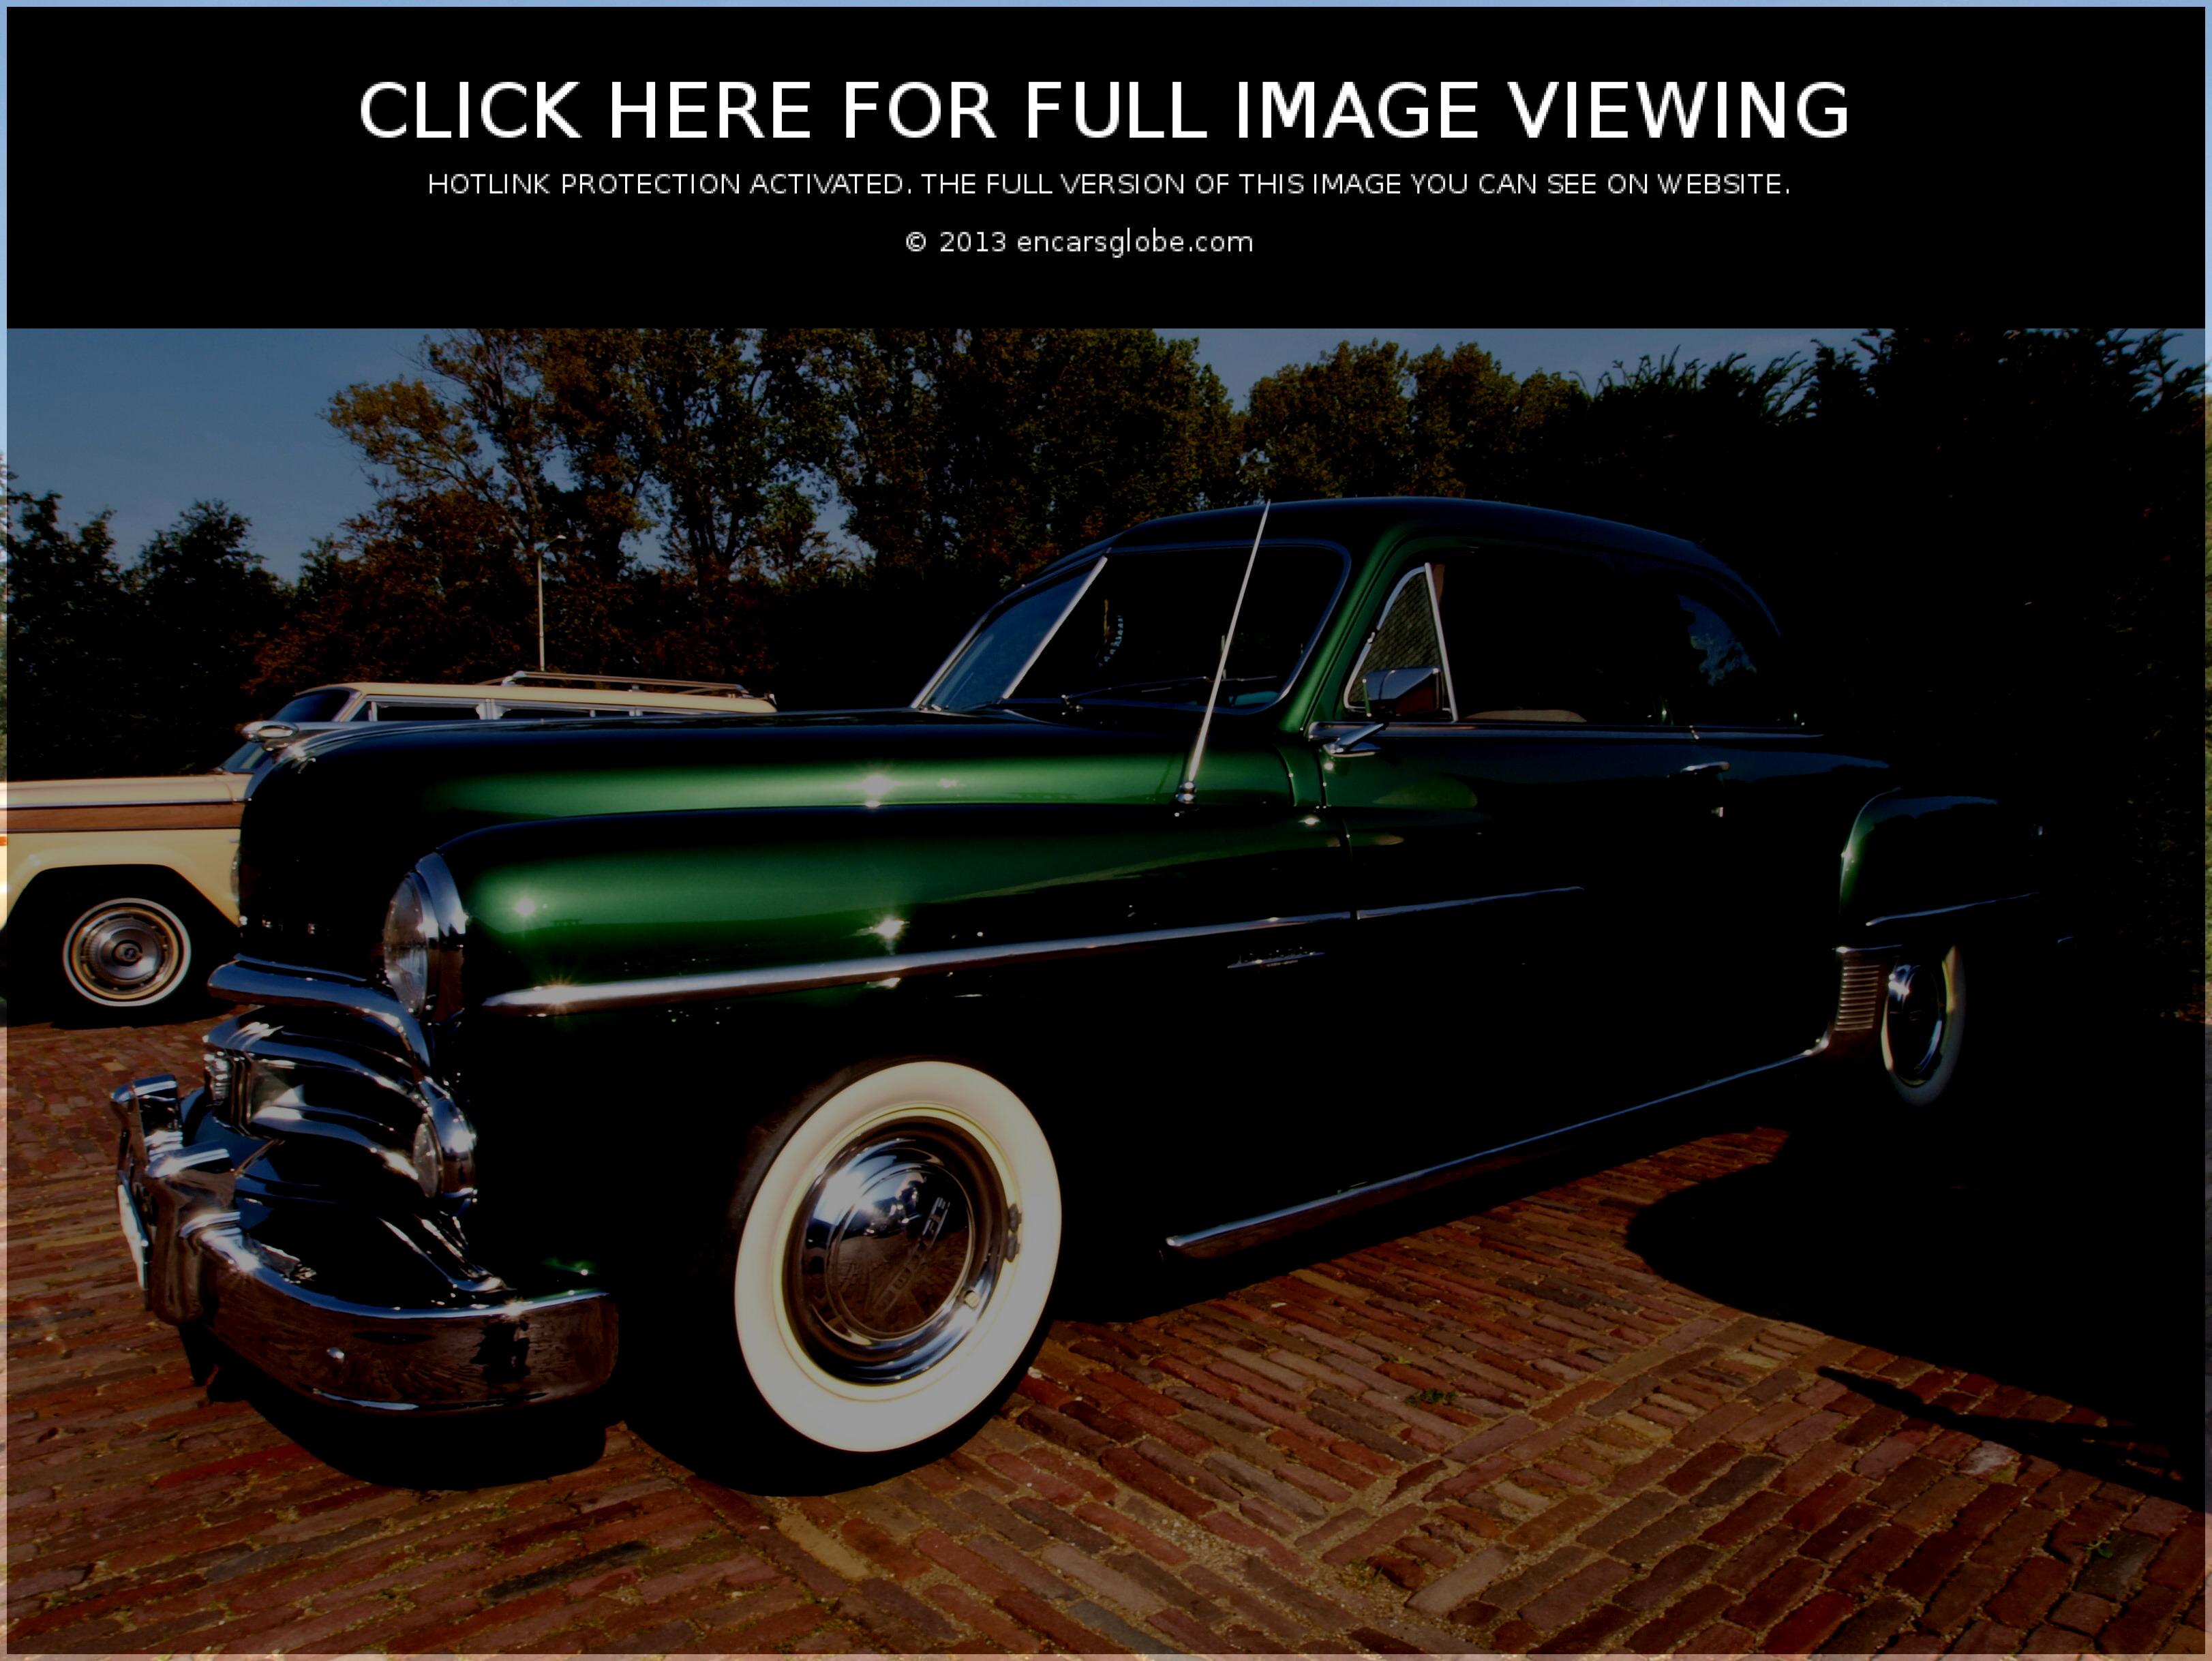 Dodge D-34 Coronet Photo Gallery: Photo #11 out of 11, Image Size ...